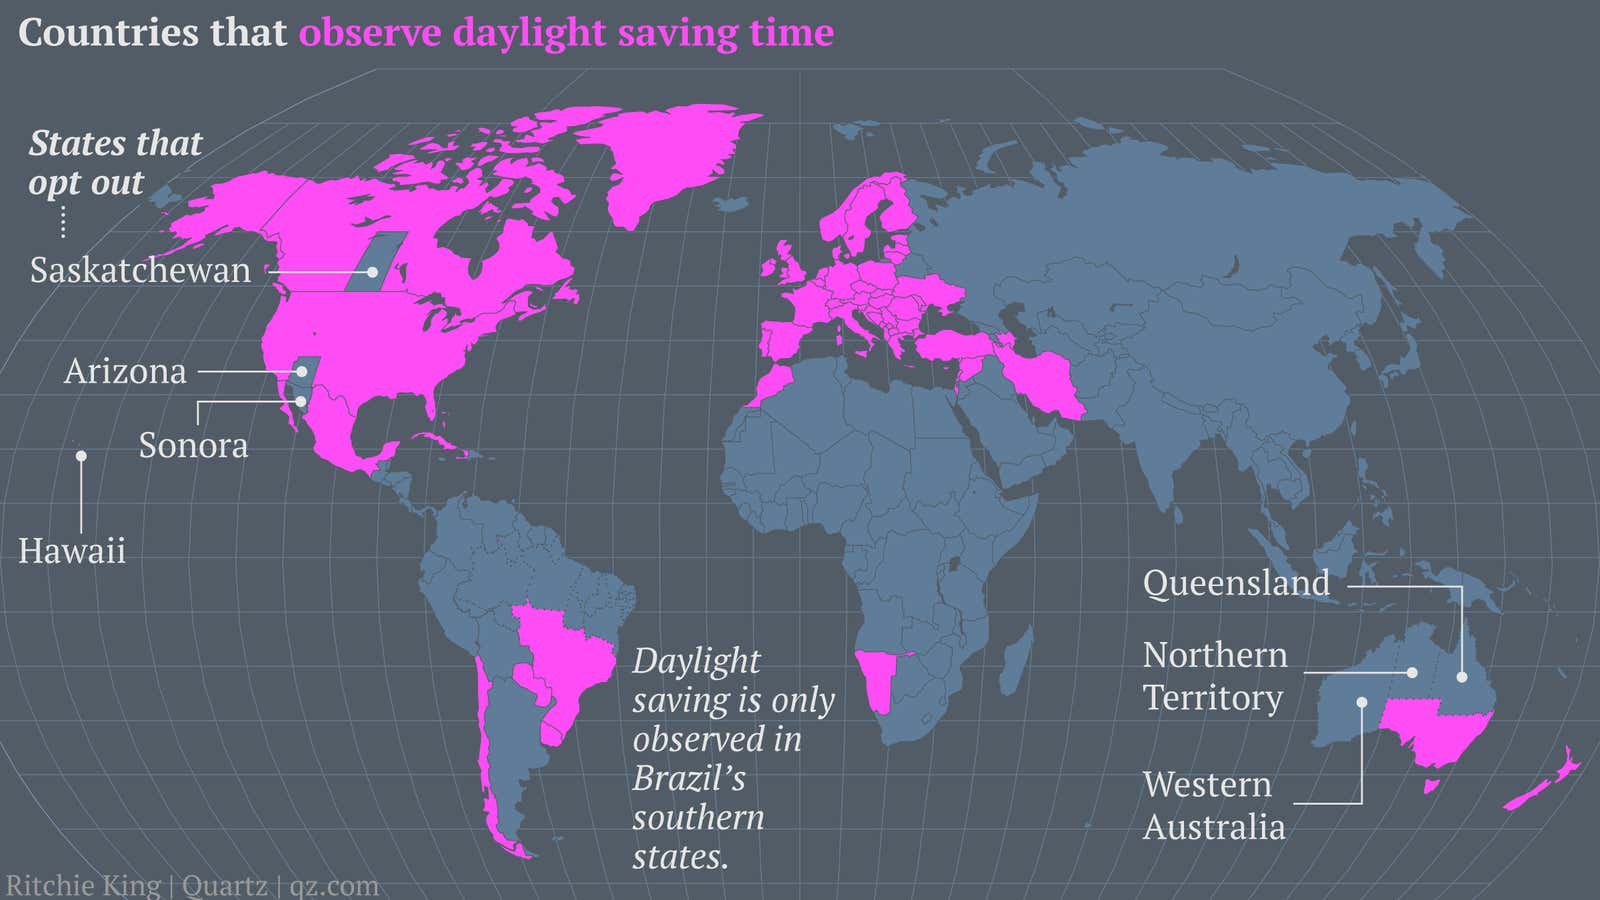 The US needs to retire daylight savings and just have two time zones—one hour apart